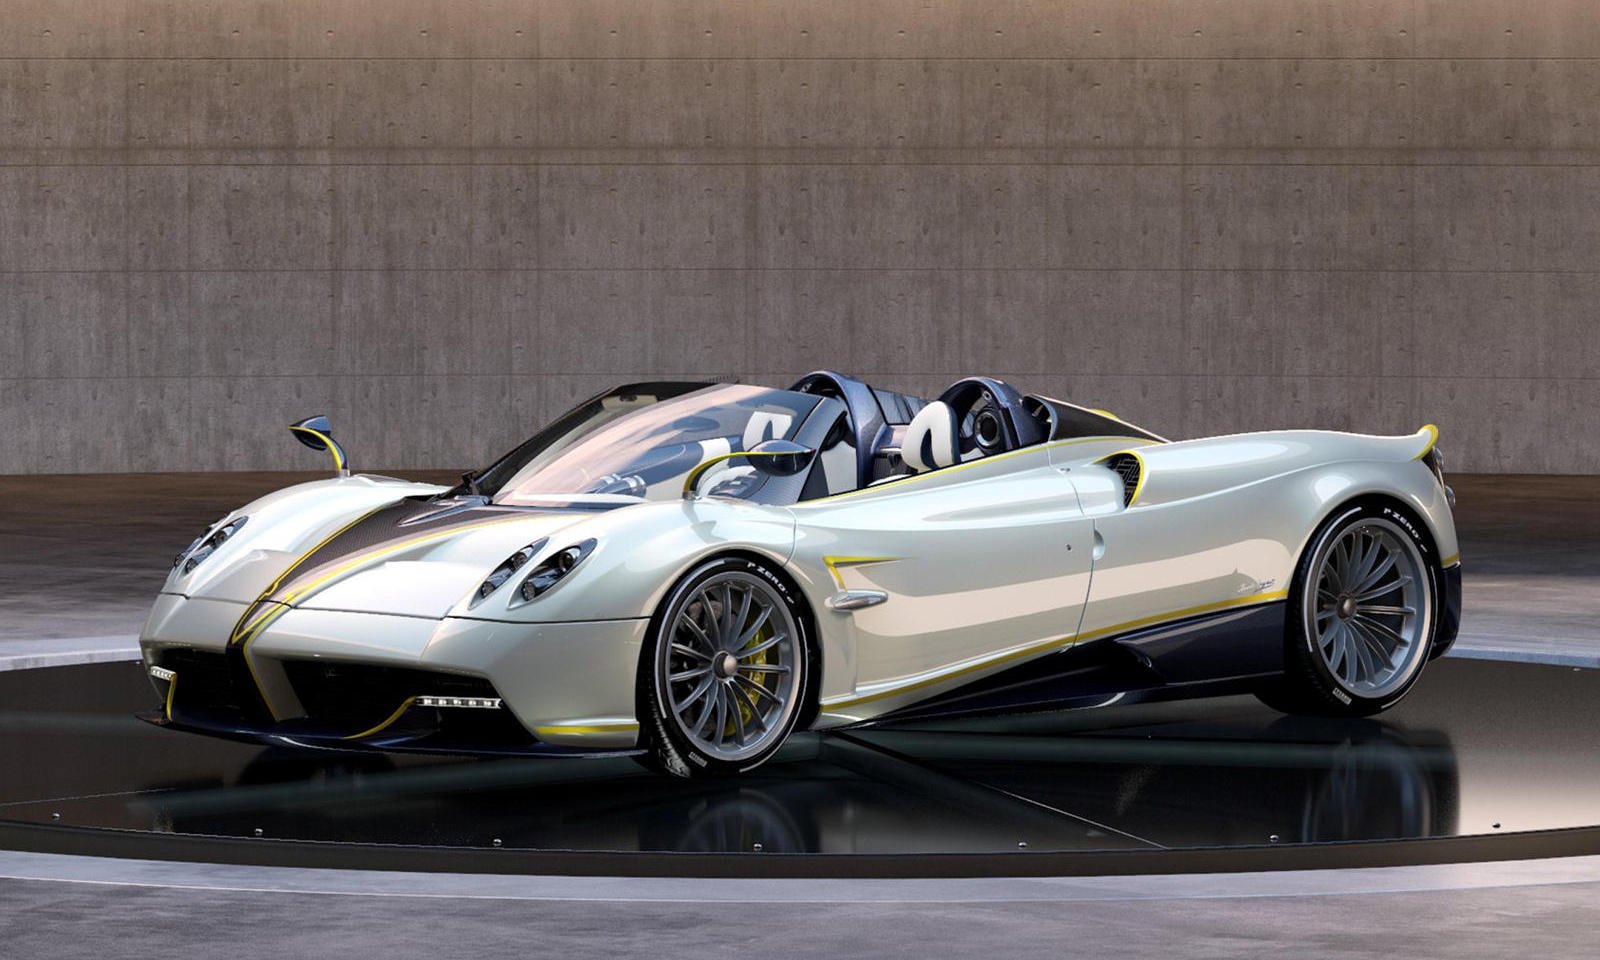 Pagani’s latest special edition Huayra Roadster is named after the biggest bird of the falcon species